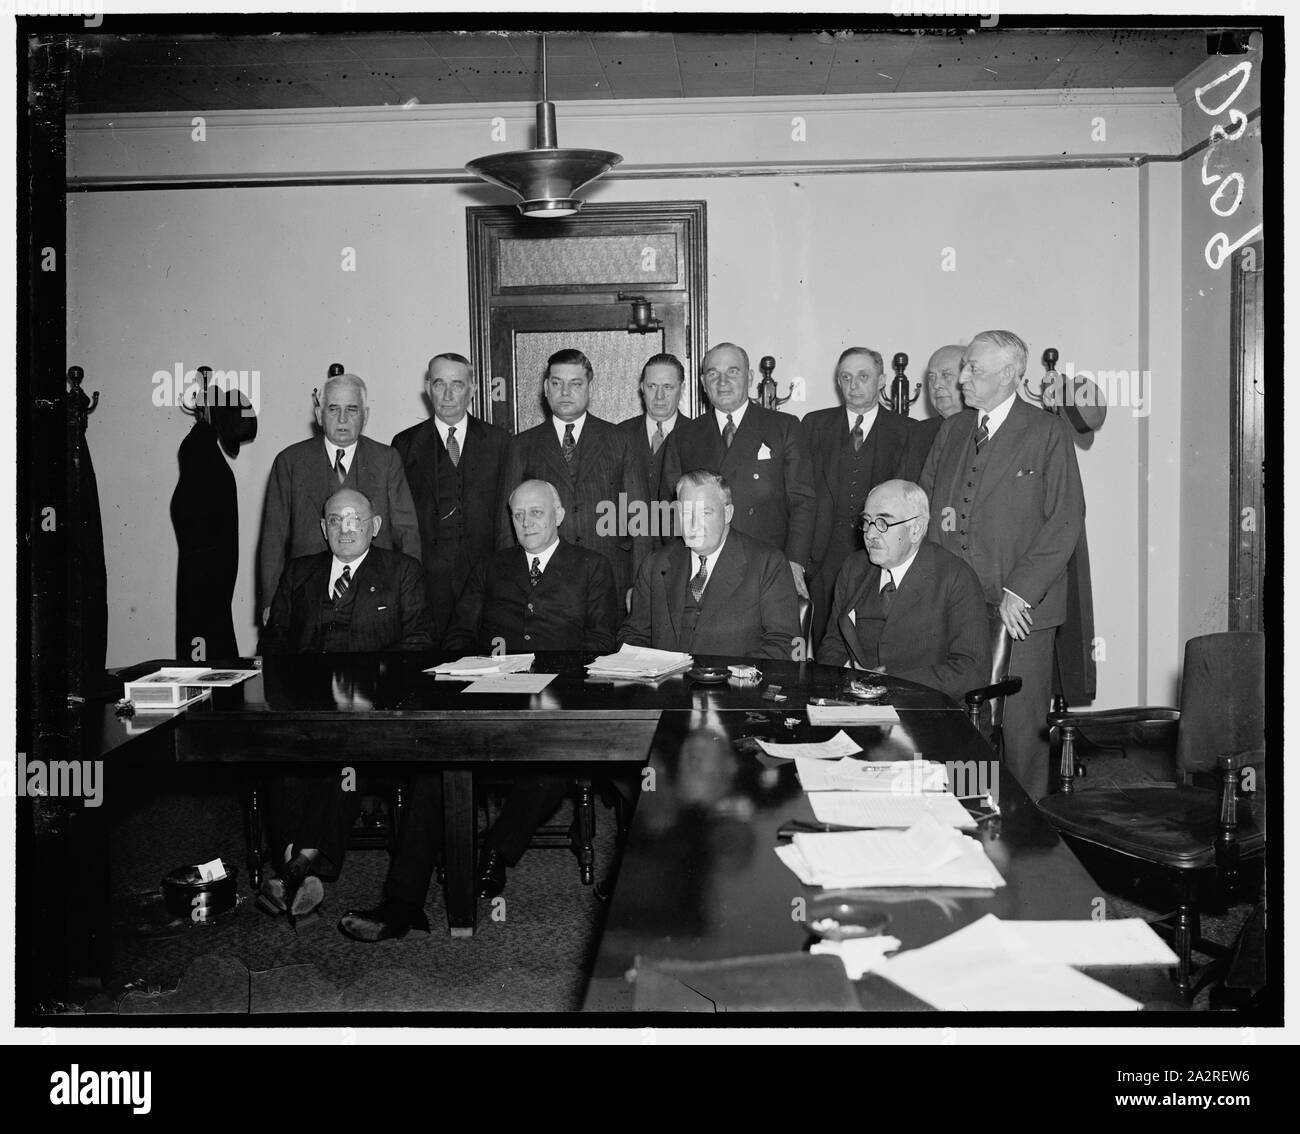 Railway Labor and Capital meet. Washington, D.C., Jan. 7. In compliance with a suggestion made by President Roosevelt in December, a joint conference between committees representing railway labor and railway managements was held here today. The most important matter considered was the Railroad Retirement Act situation, but no conclusion was reached. In the photograph, left to right: (seated) J.A. Phillips, Order of Railways Conductors; M.W. Clement, President of the Pennsylvania Railroad; and George B. Elliot, President of the Atlantic Coast Line; standing, left to right: E.J. Manion, Order of Stock Photo